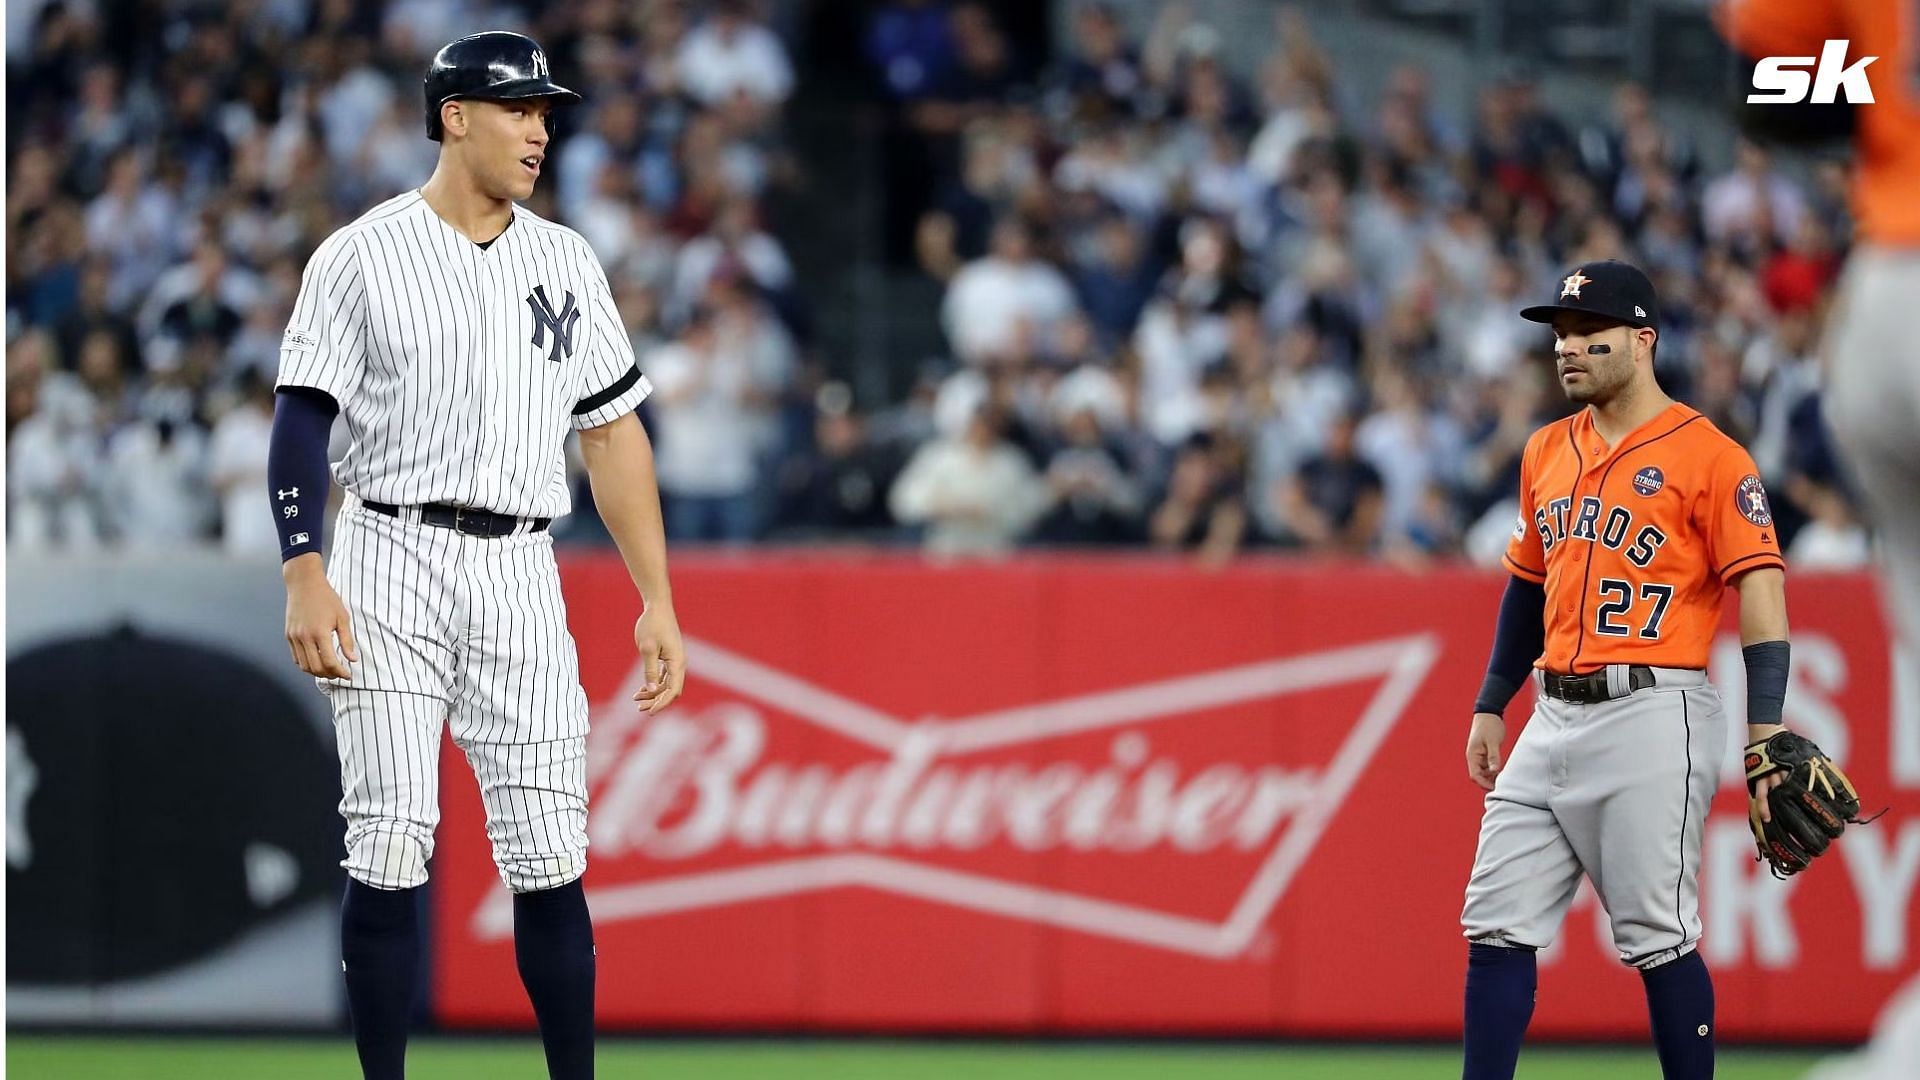 Aaron Judge was robbed of an MVP award, and the league agrees